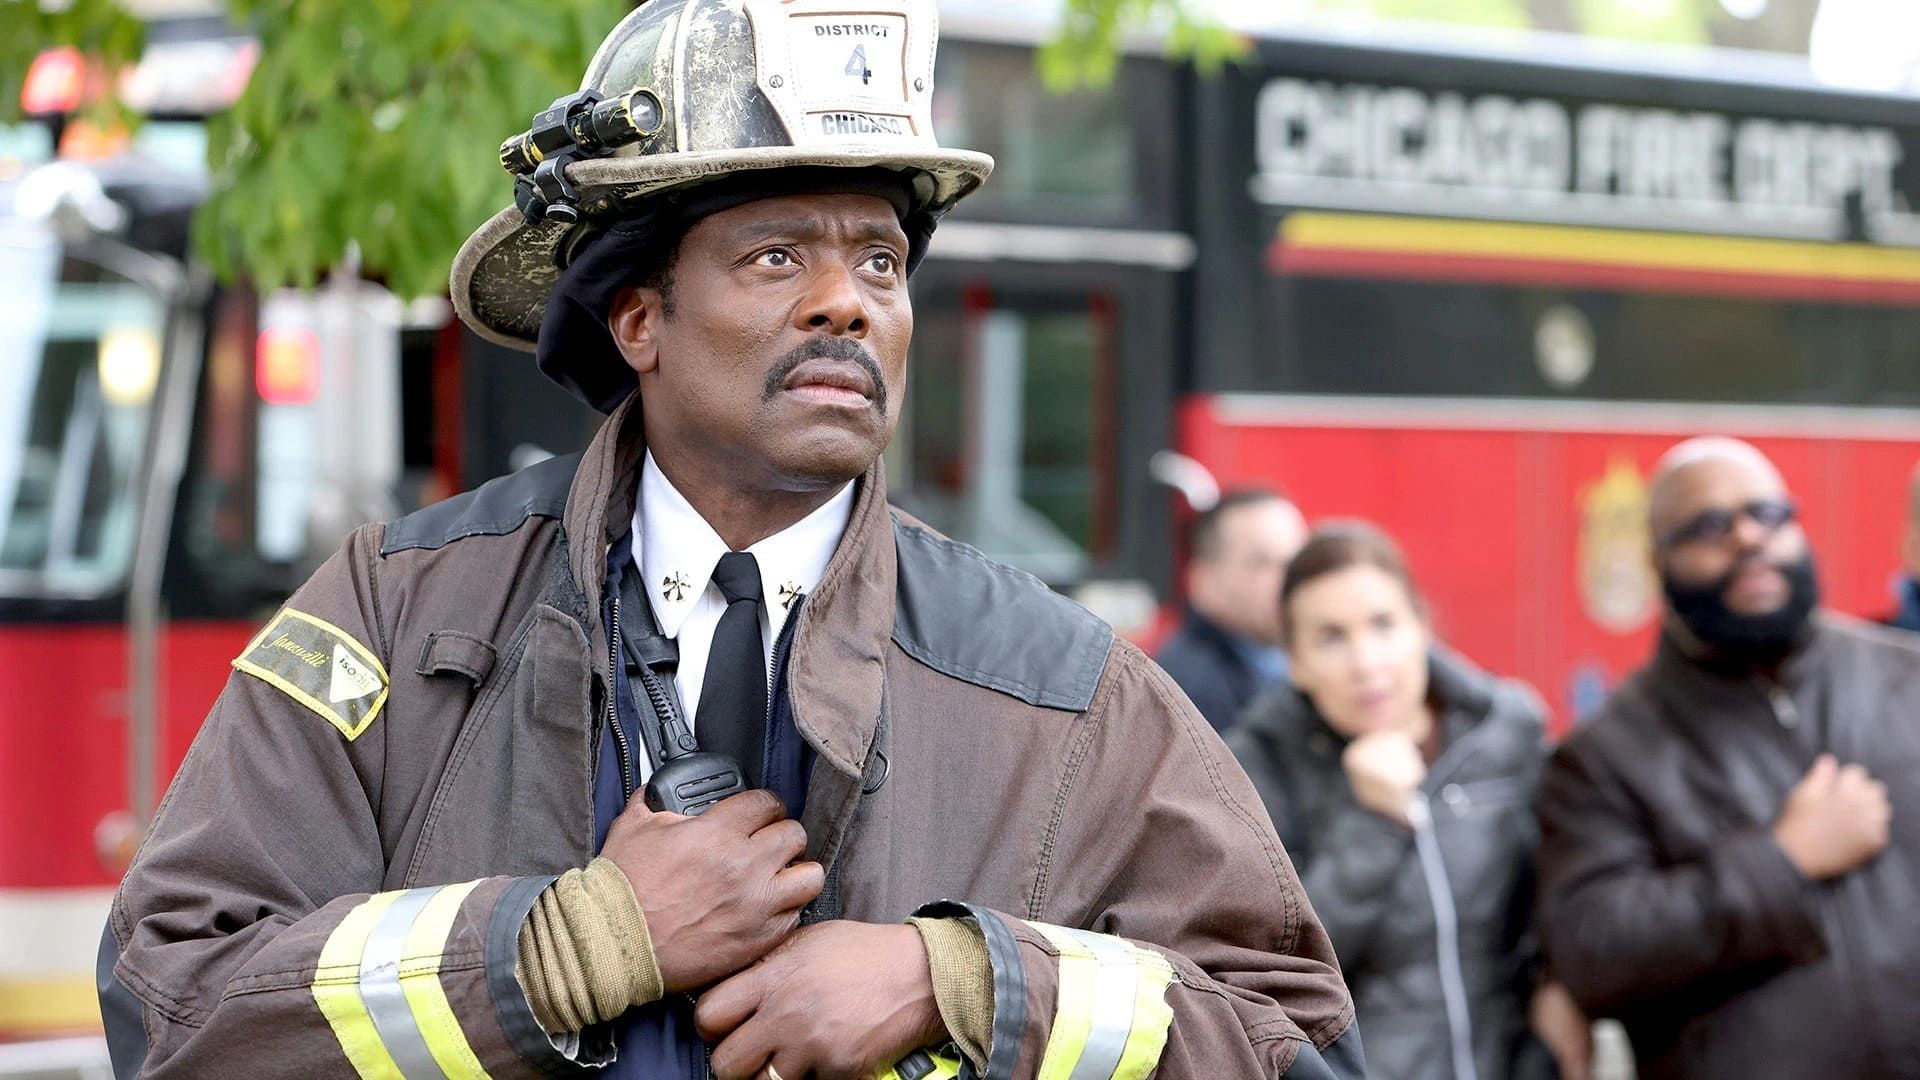 Chicago Fire background